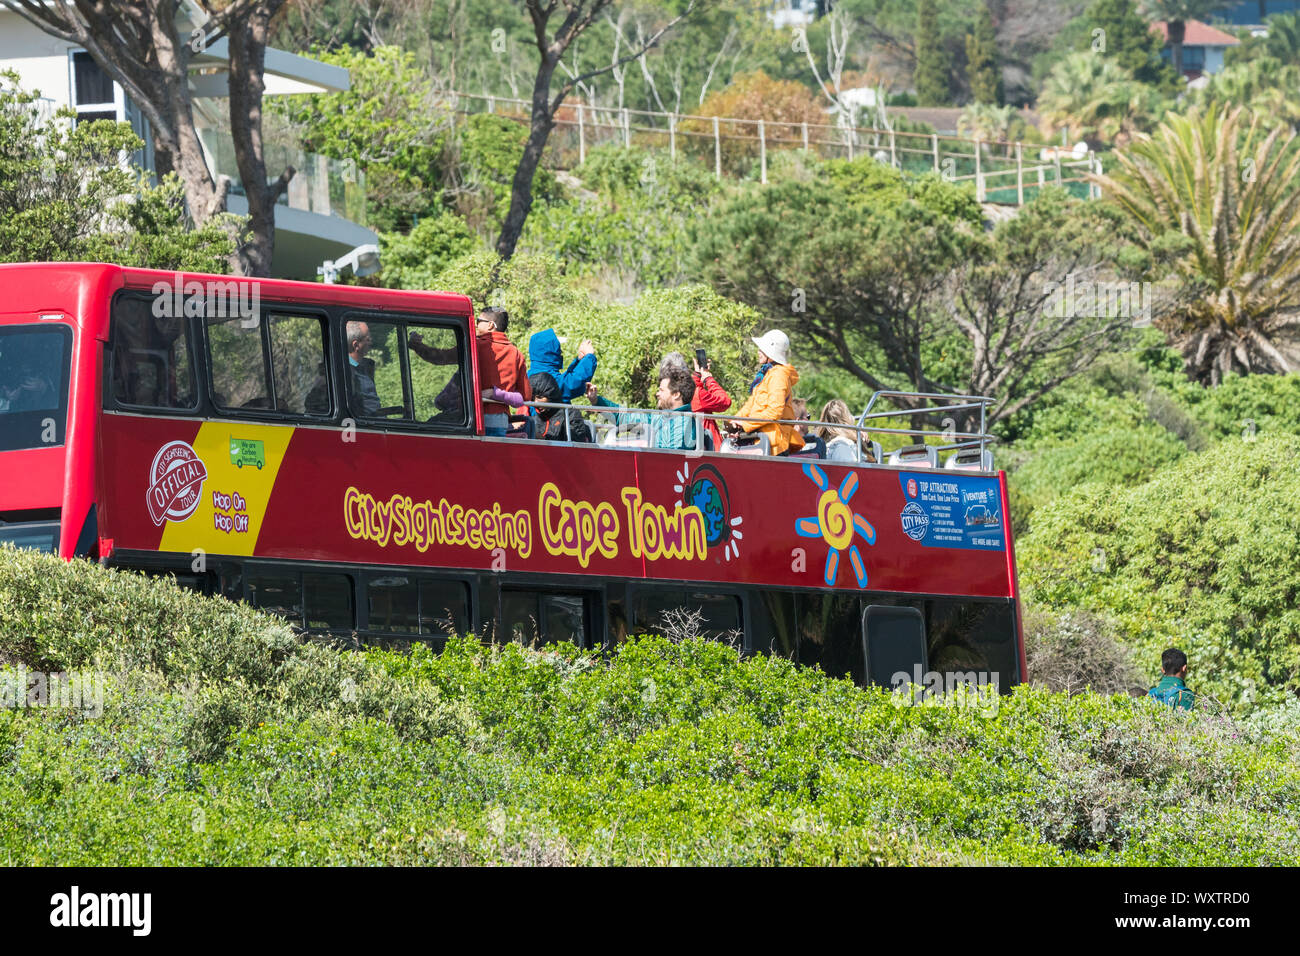 tourists and people on Cape Town city sightseeing red bus on top deck taking photos and selfies while touring and visiting Camps Bay suburb on holiday Stock Photo